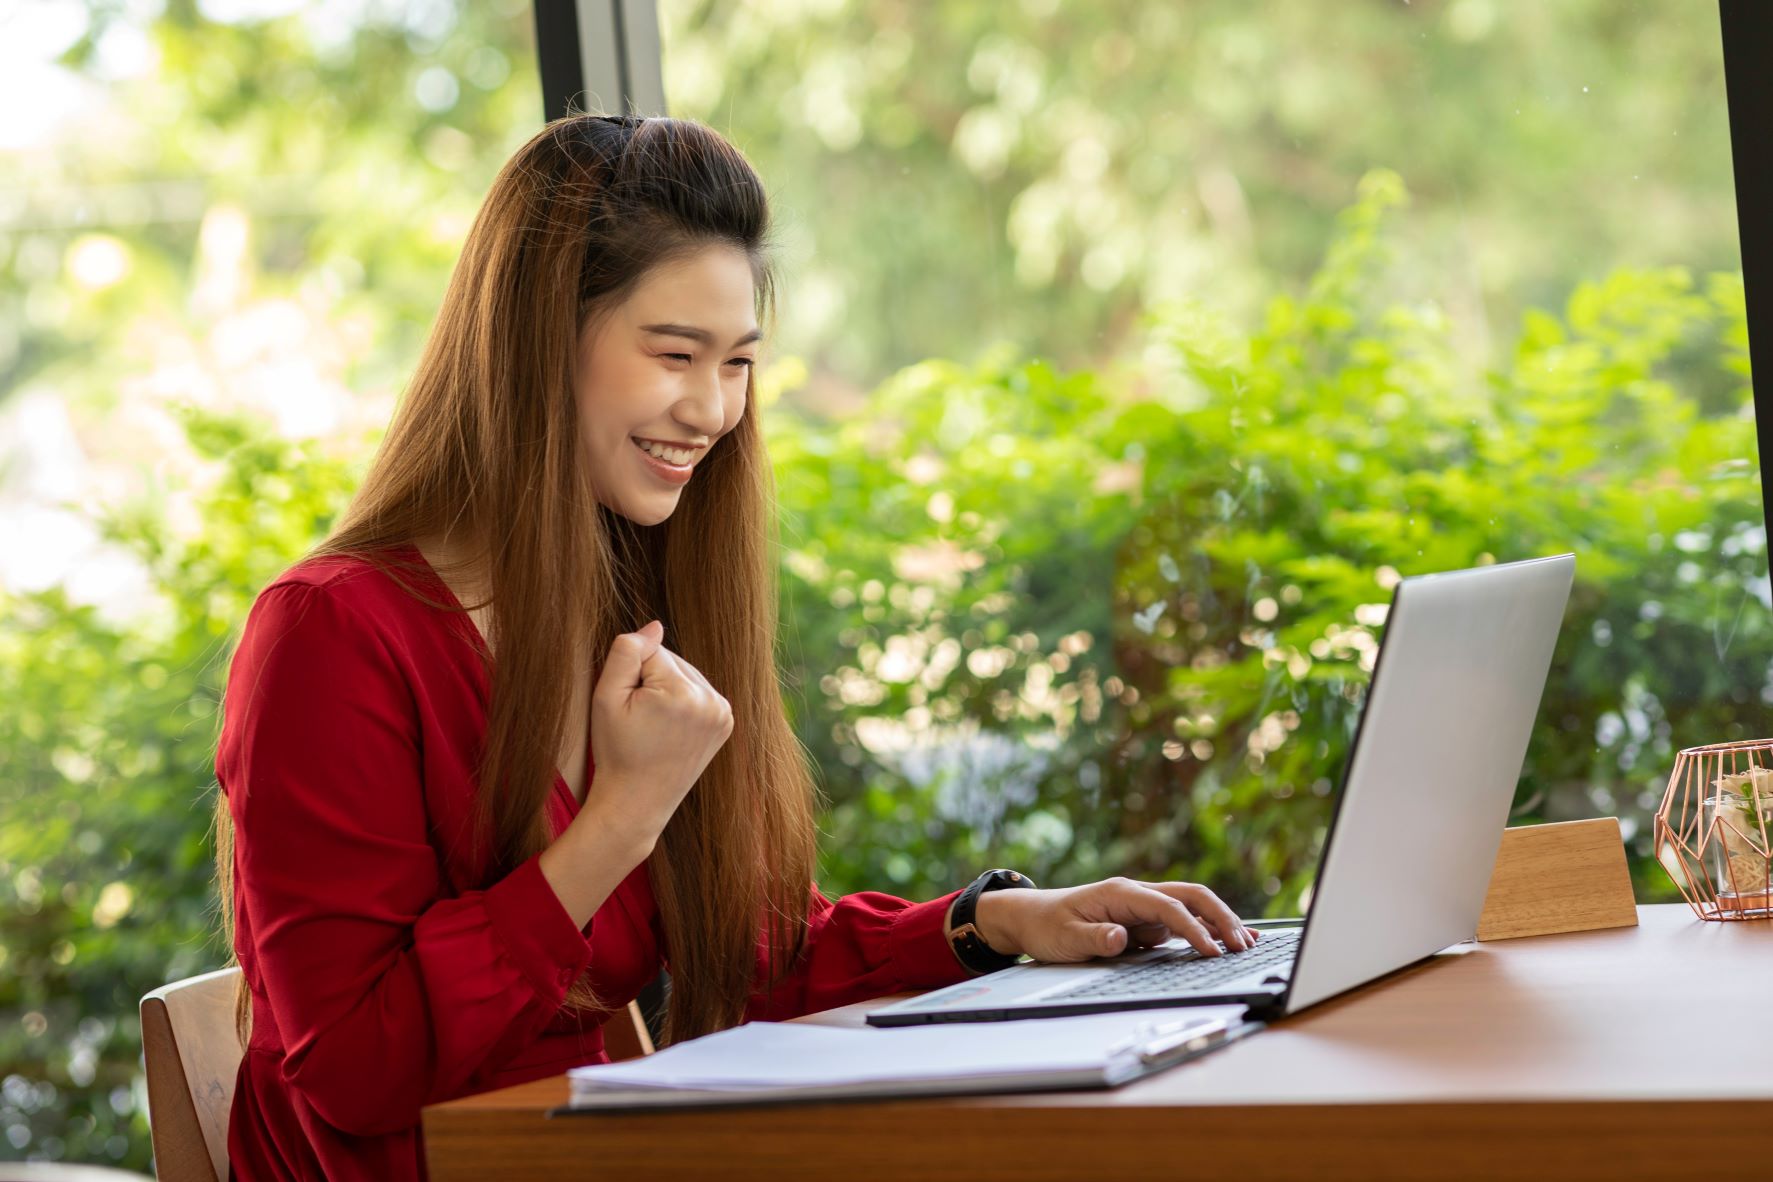 Young woman smiling and pumping fist at laptop